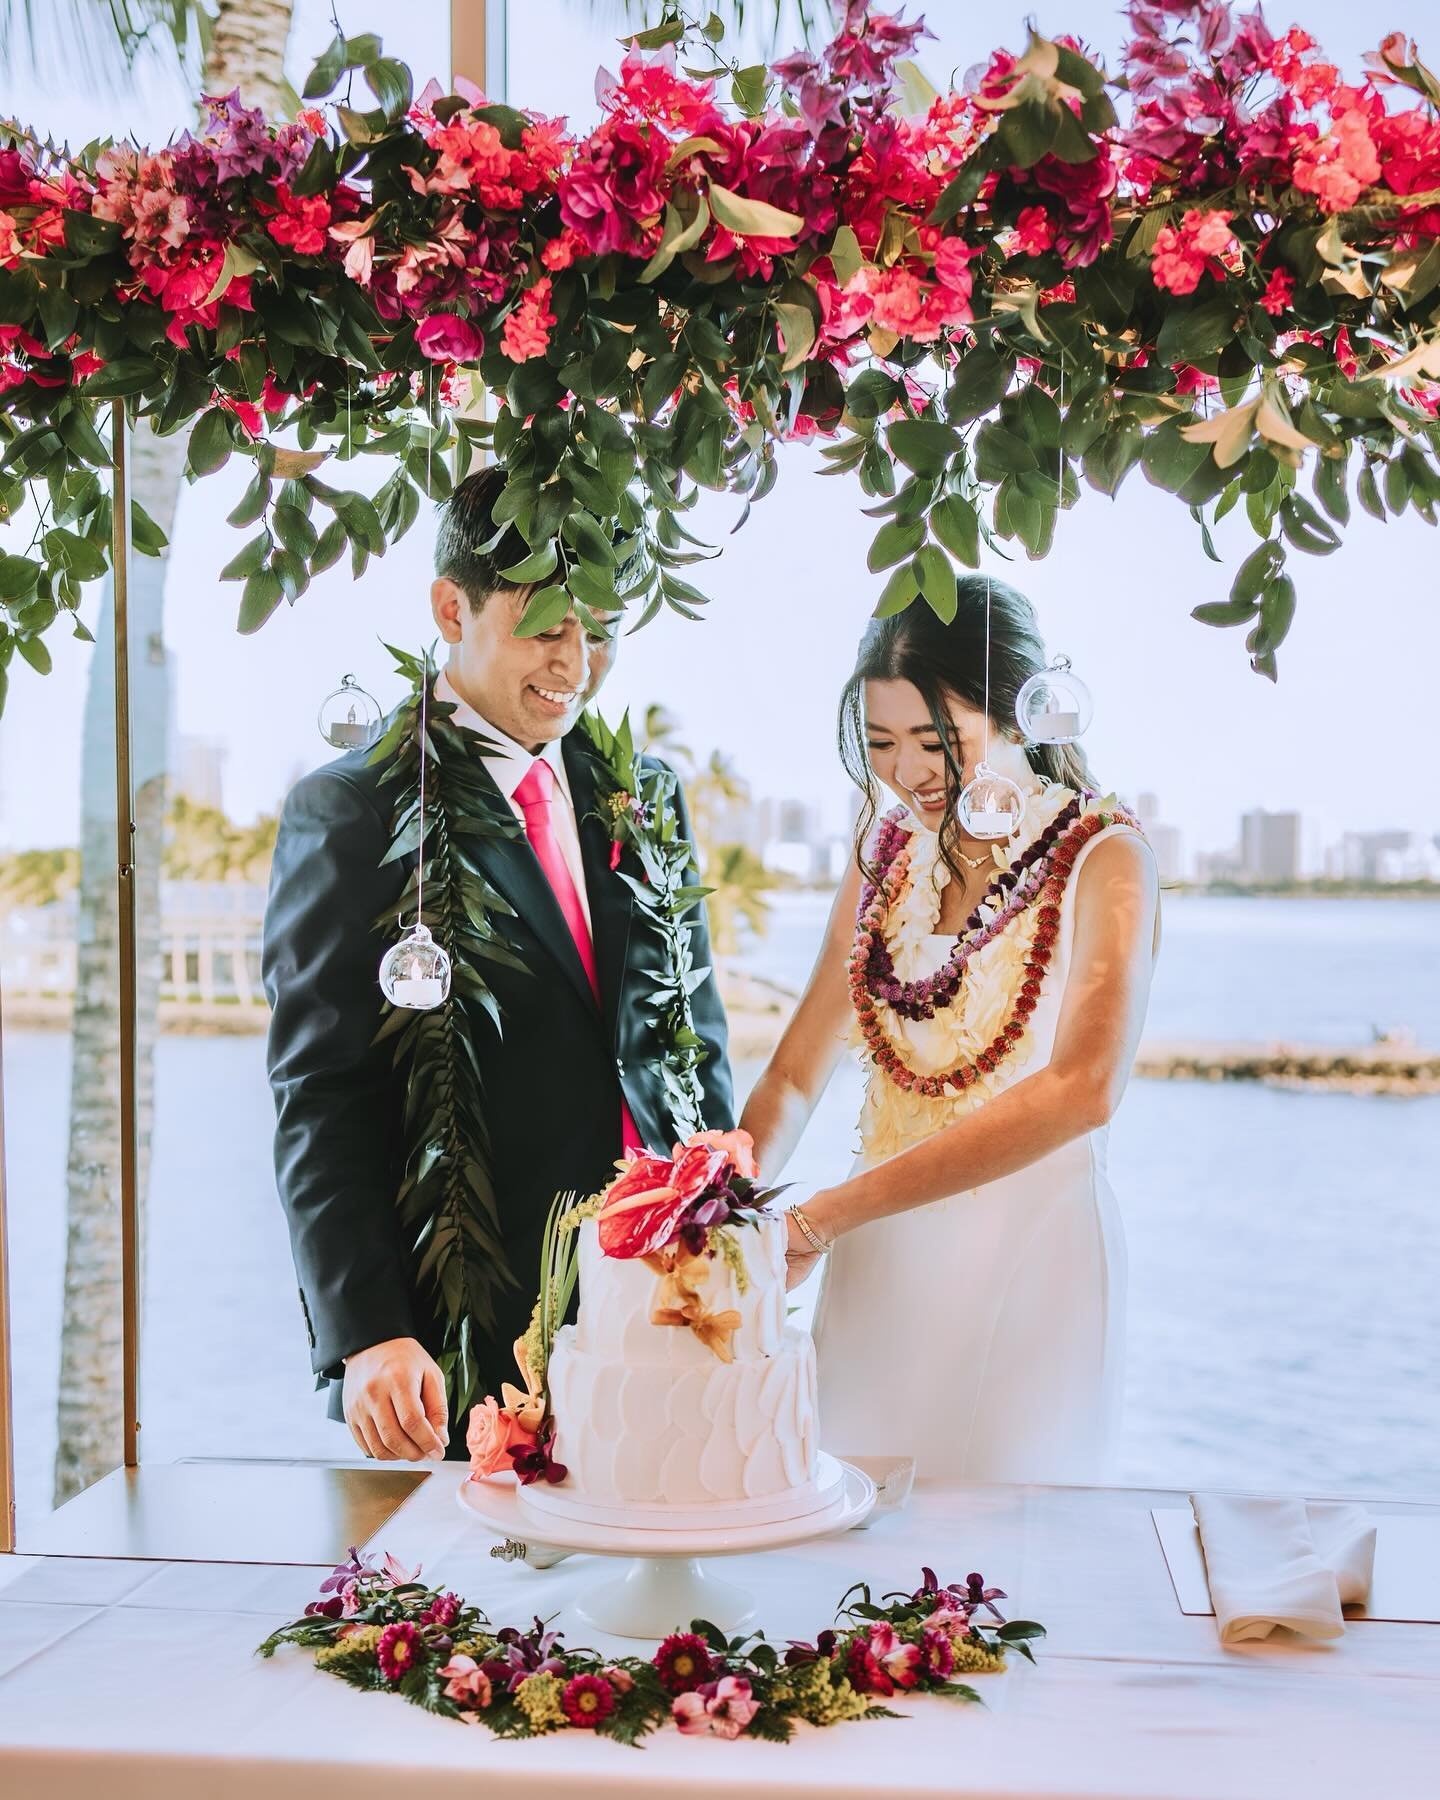 Dress up your wedding cake with flowers for a fun photo moment! 😘

Planner: @oneandonlyhawaii 
Venue: @53bythesea_hawaii 
Photography: @mdee_photo @jjavier.photography 
Cake: @manacakeshawaii 

#weddingreception #weddingtablescape #weddingcakedecor 